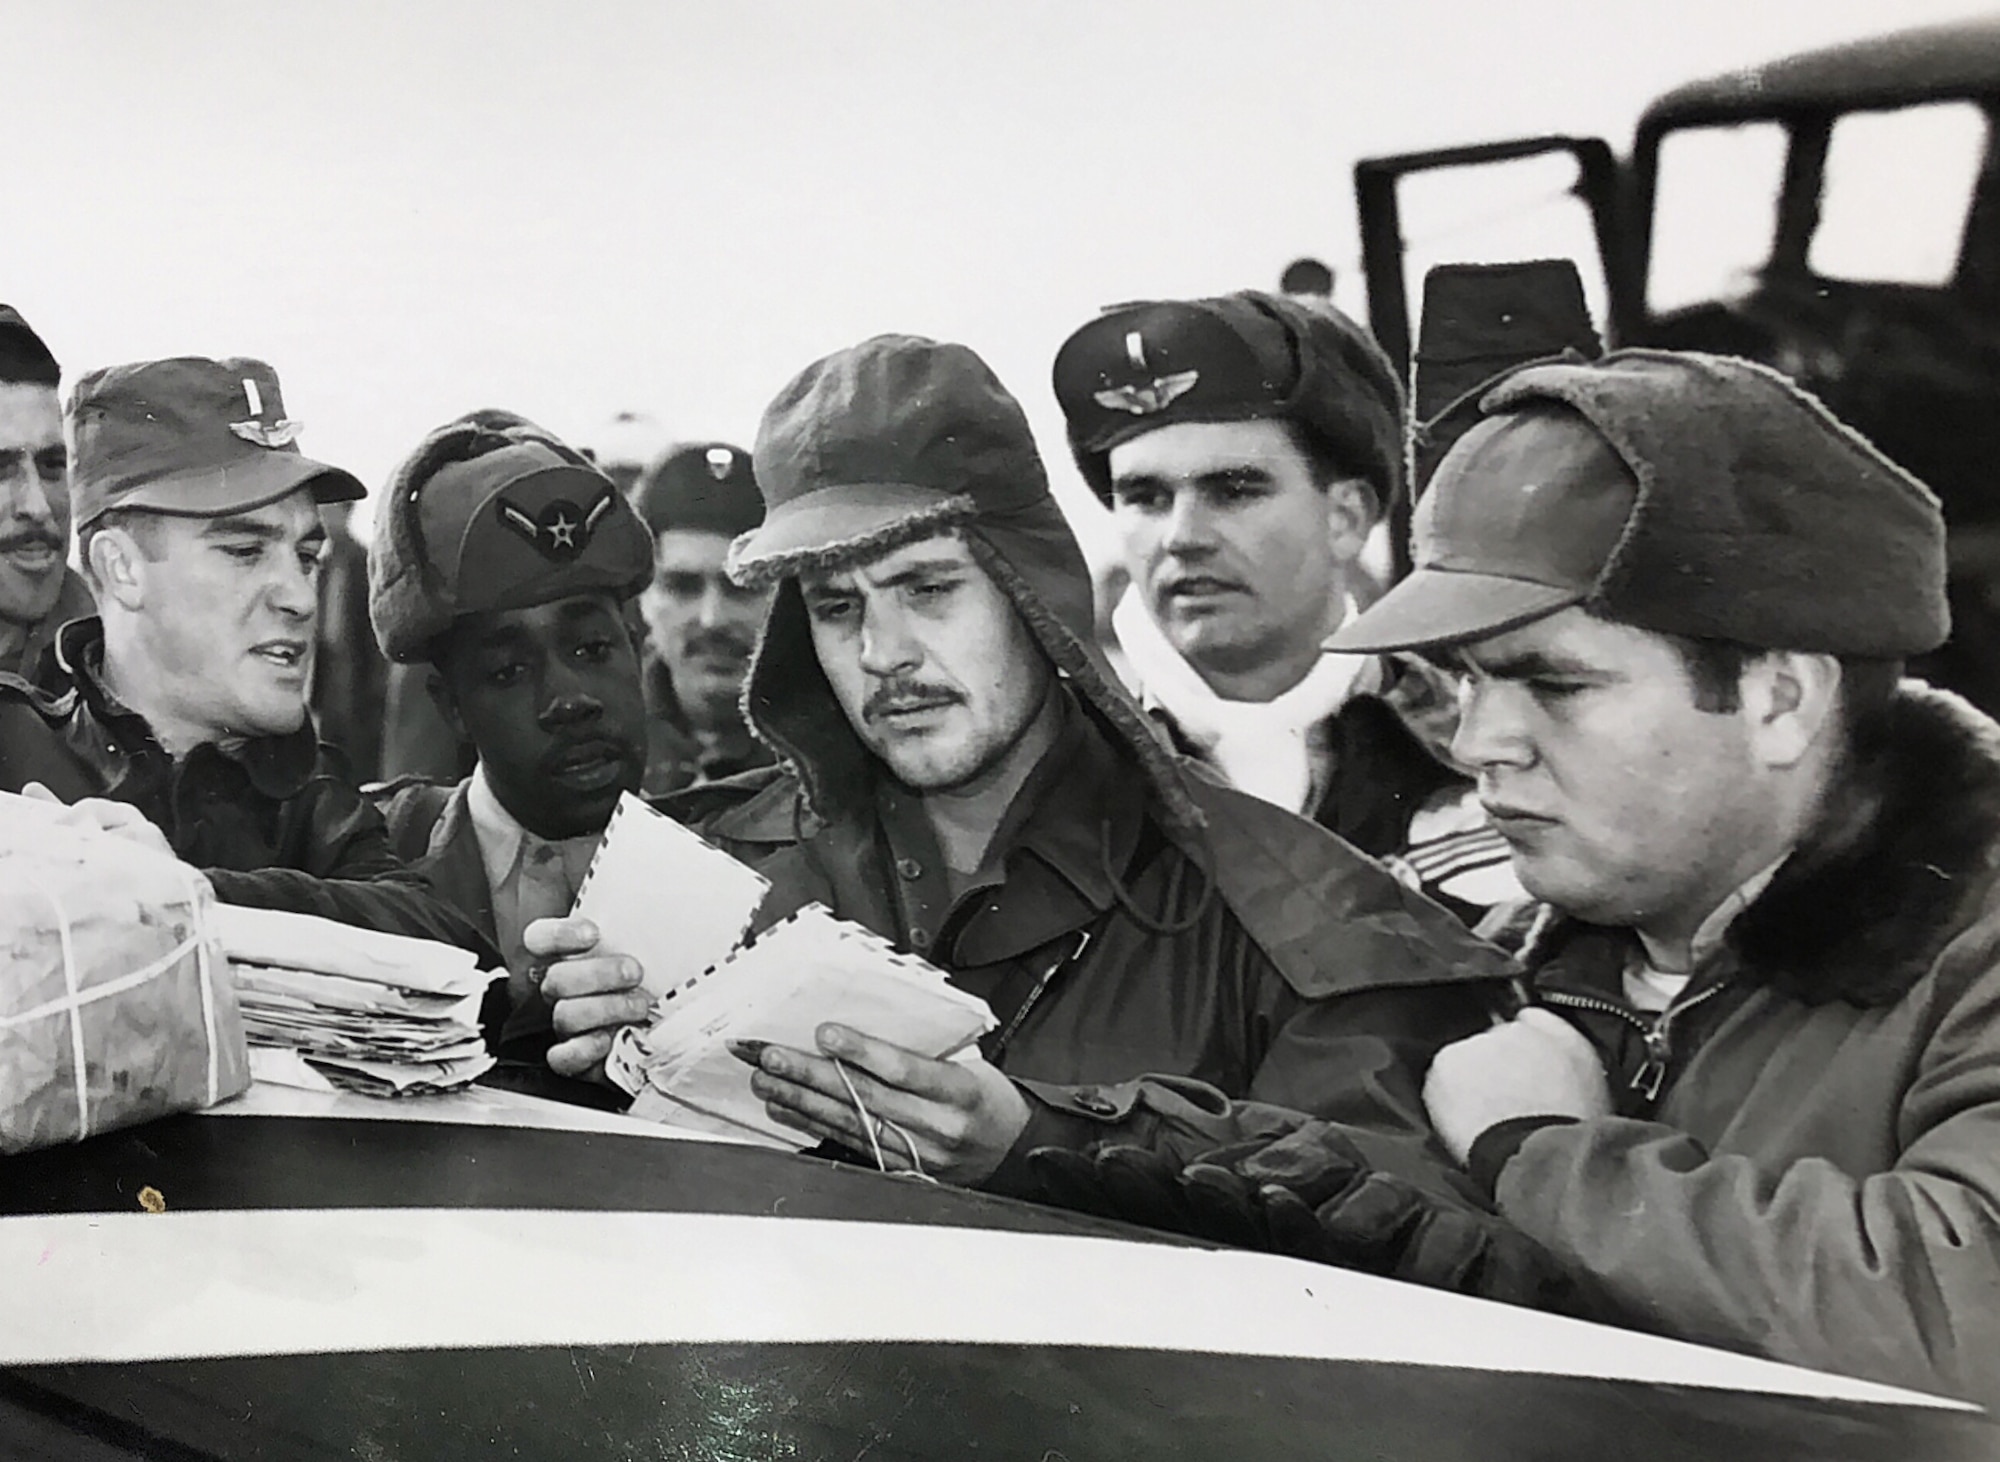 Airman gather together for "mail call" on the flight line during the Korean War. (U.S. Air Force photo)